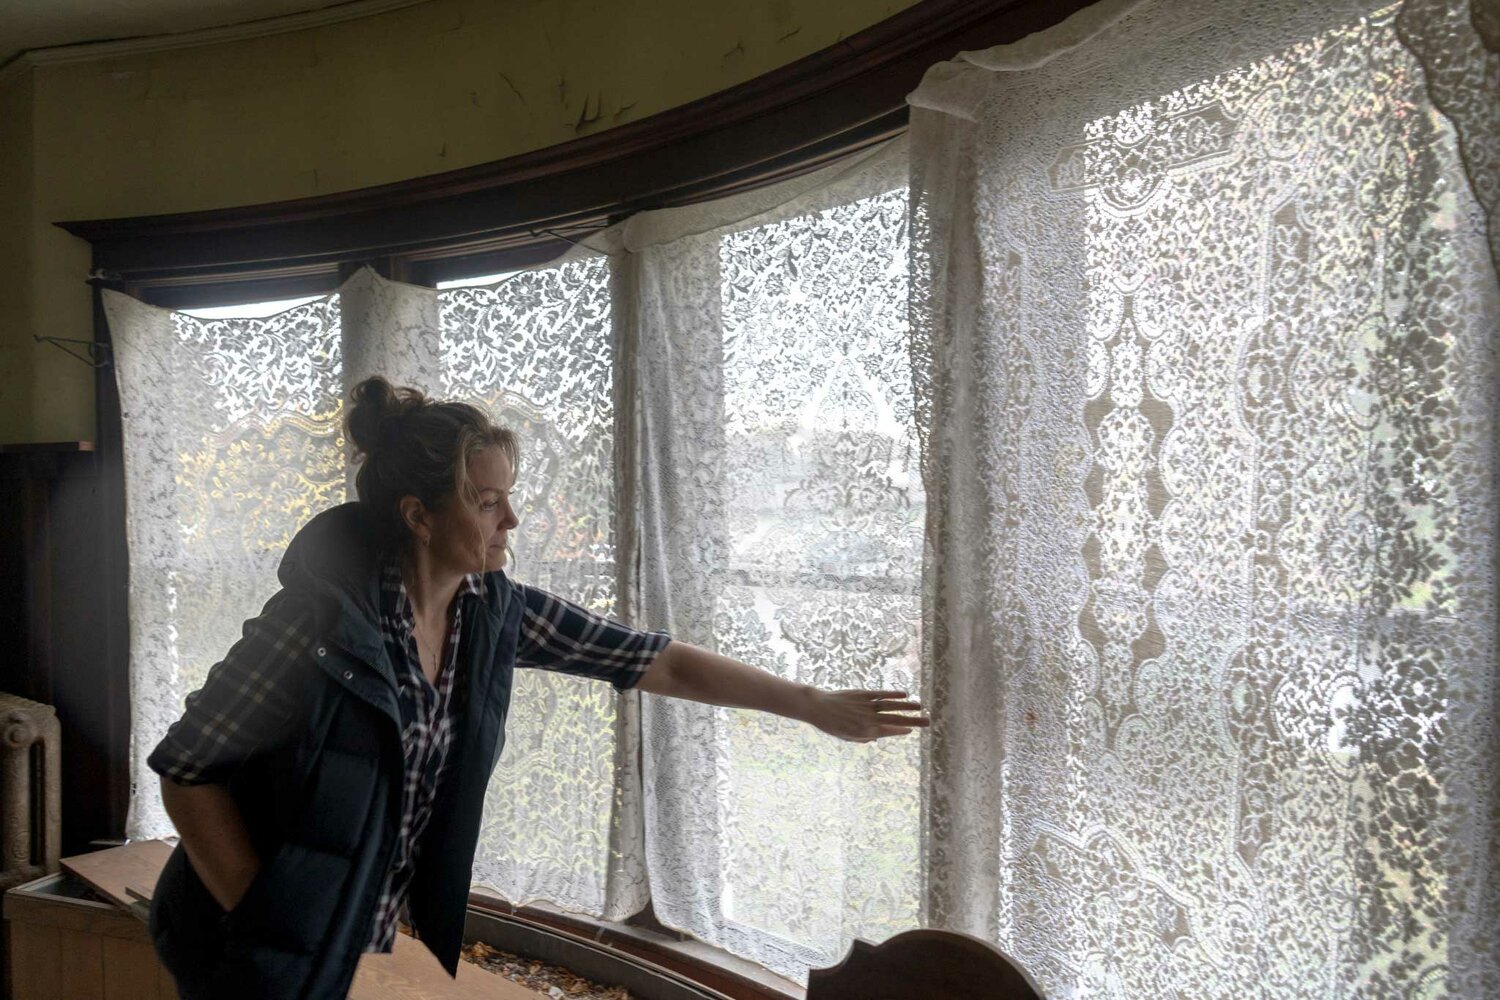 Rachel Vezzetti moves aside the lace curtains in the downstairs of her historic home to show the original curved glass windows. The 1903 home underwent at least one significant renovation in the 1960s and ‘70s but many of the home's original features are intact.